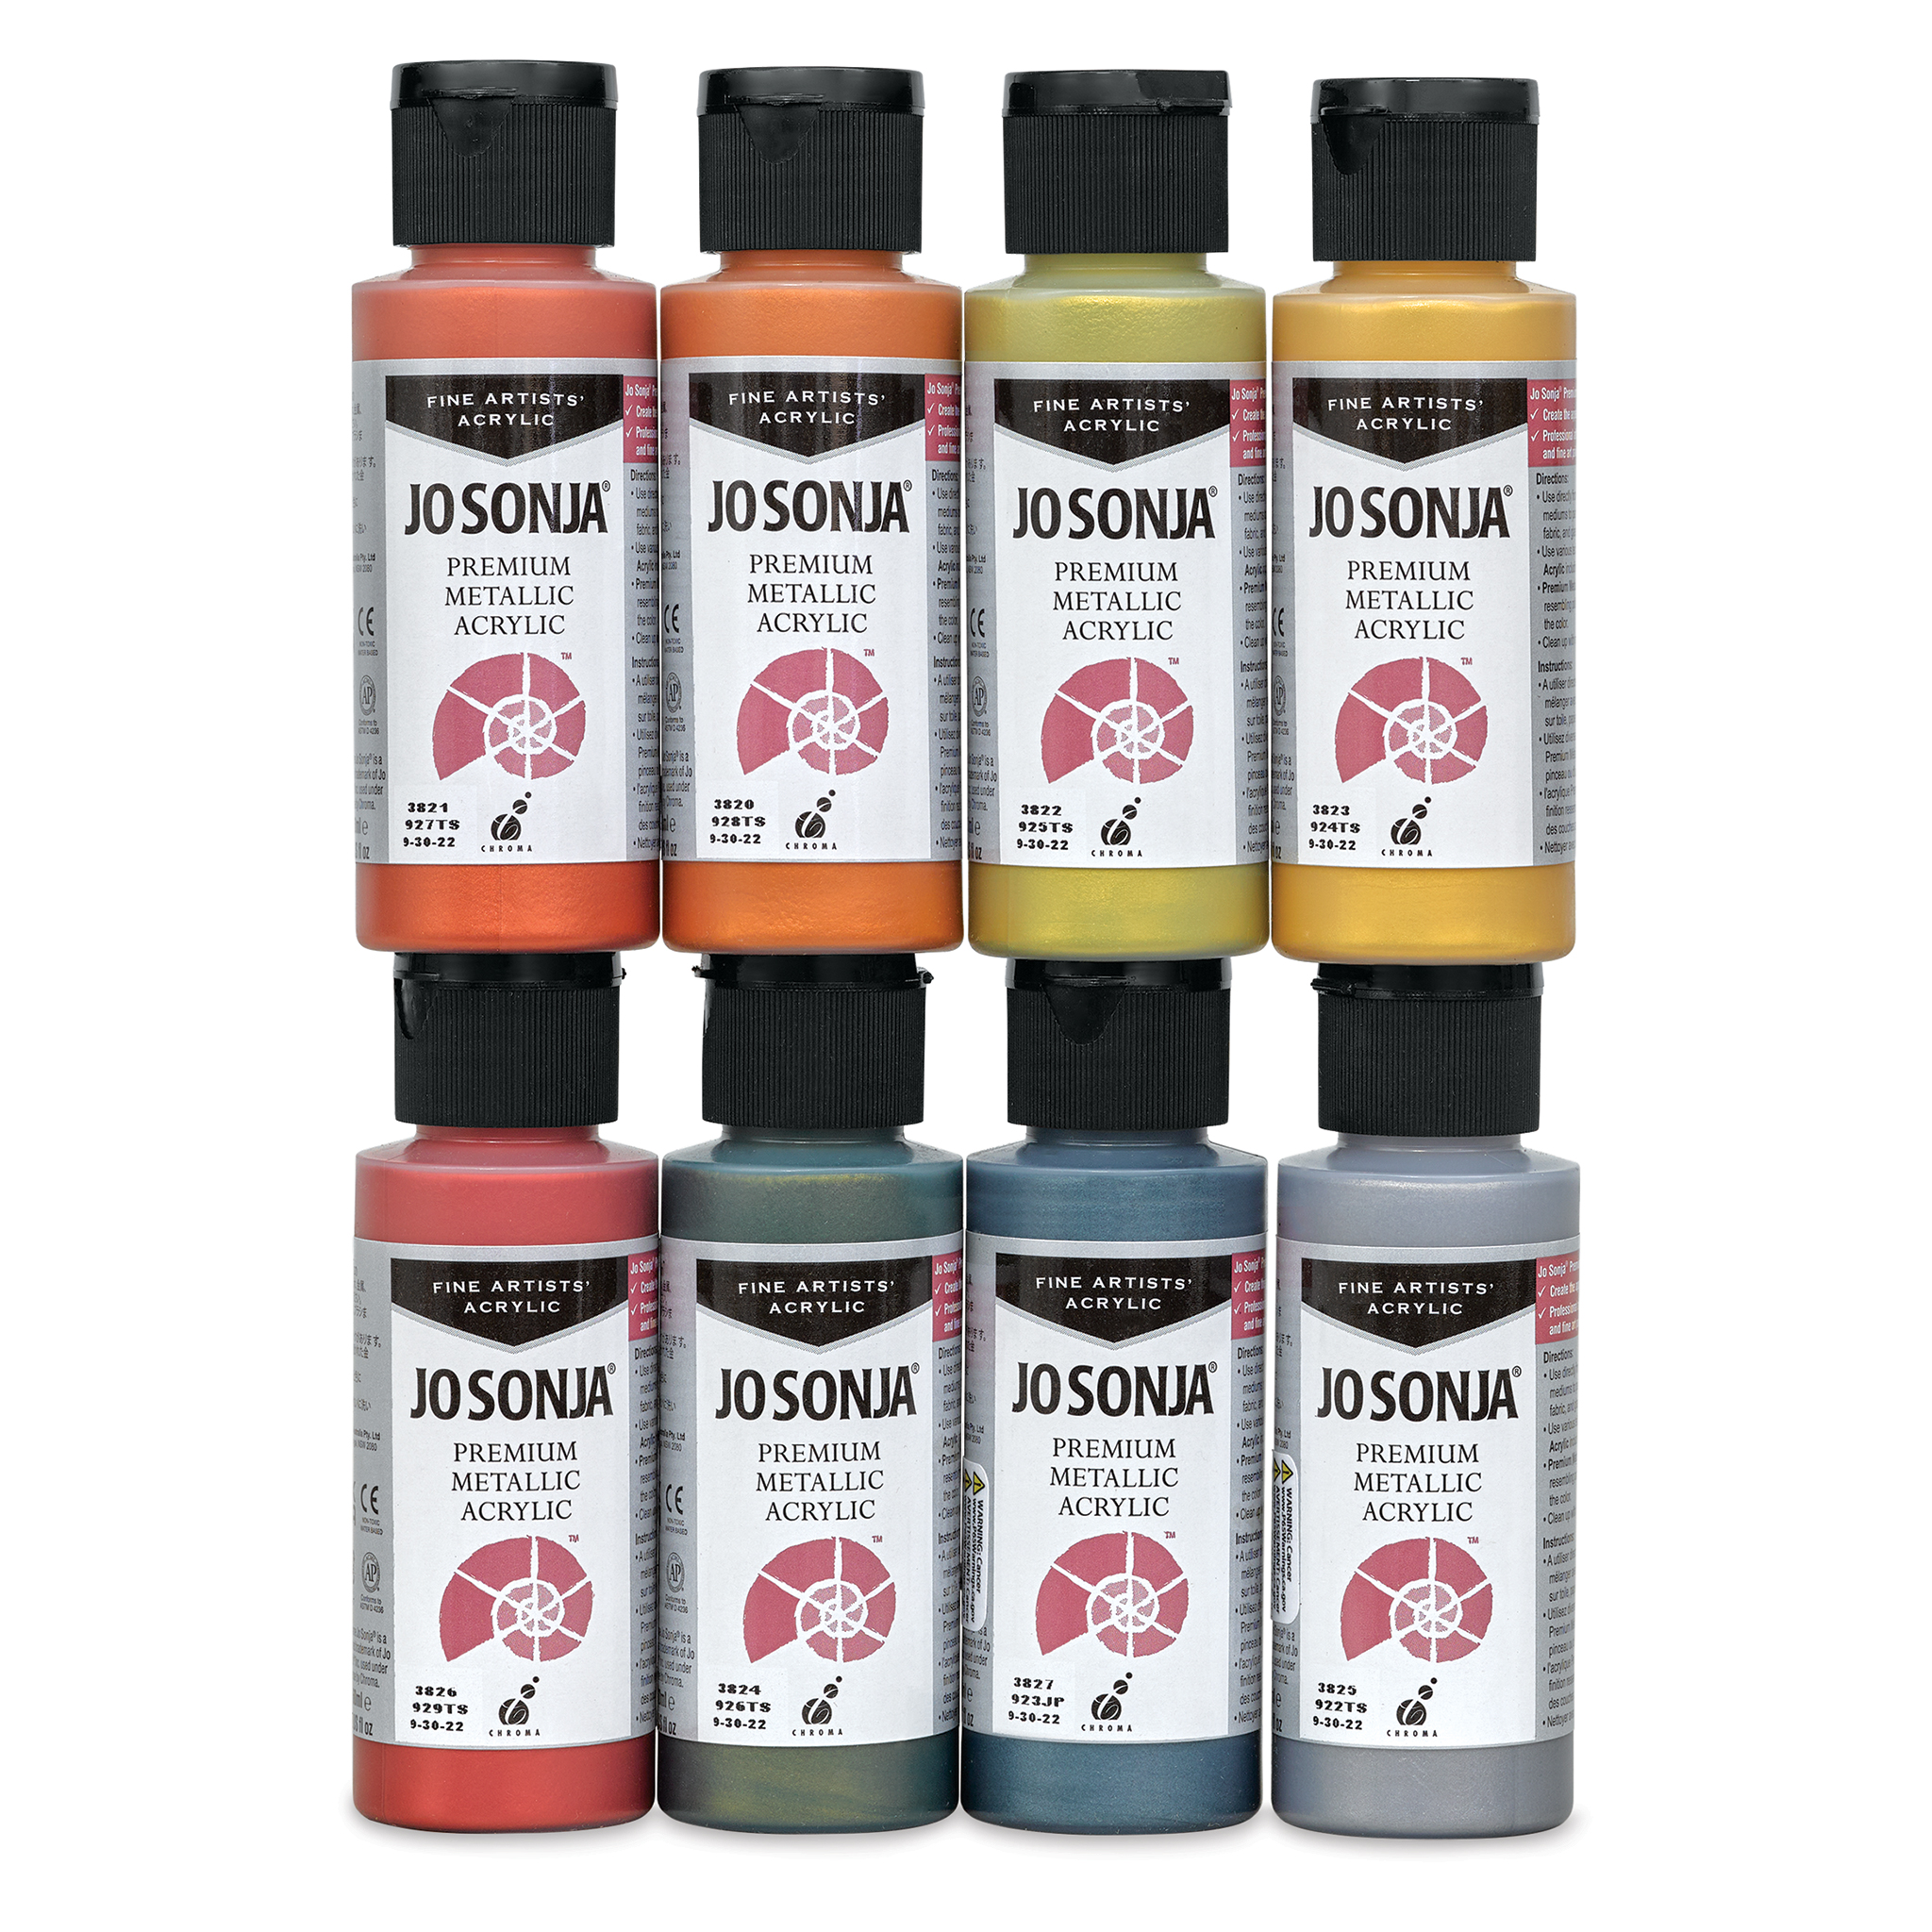 Chroma's Jo Sonja Premium Metallic and Pearlescent Acrylic Paints and Sets